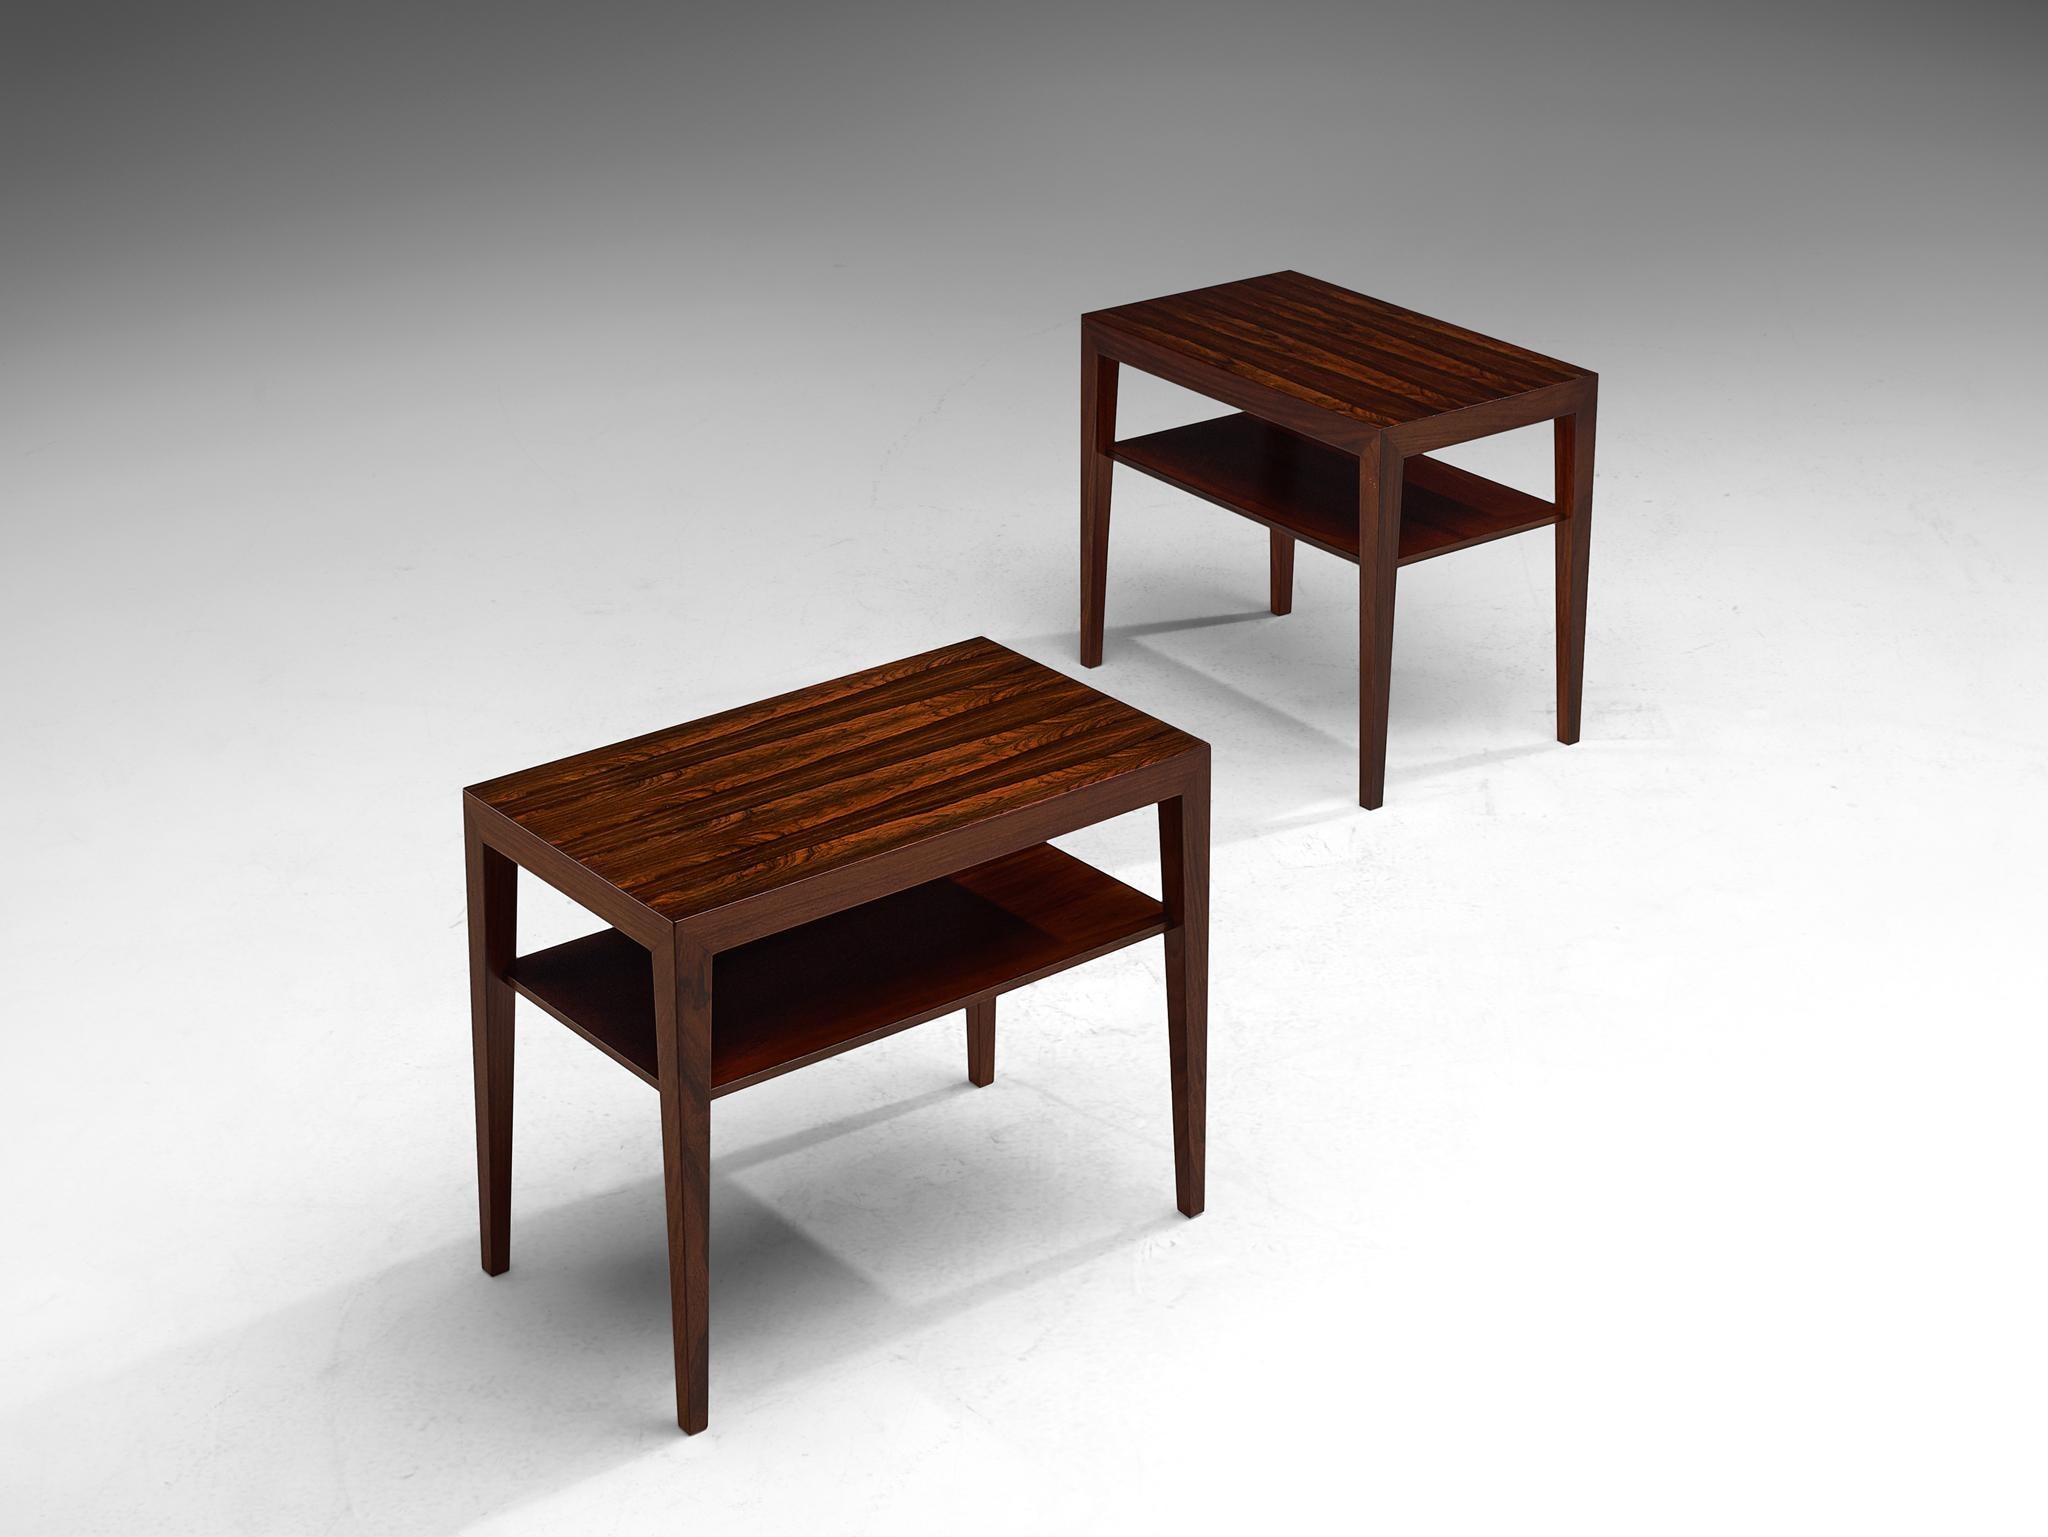 Severin Hansen Jr. for Haslev Møbelsnedkeri, side tables, rosewood, Denmark, 1950s-1960s.

A pair of rosewood side tables with underlaying shelf. The tables have a clean, modest yet elegant design and feature rectangular tops with tapered legs.